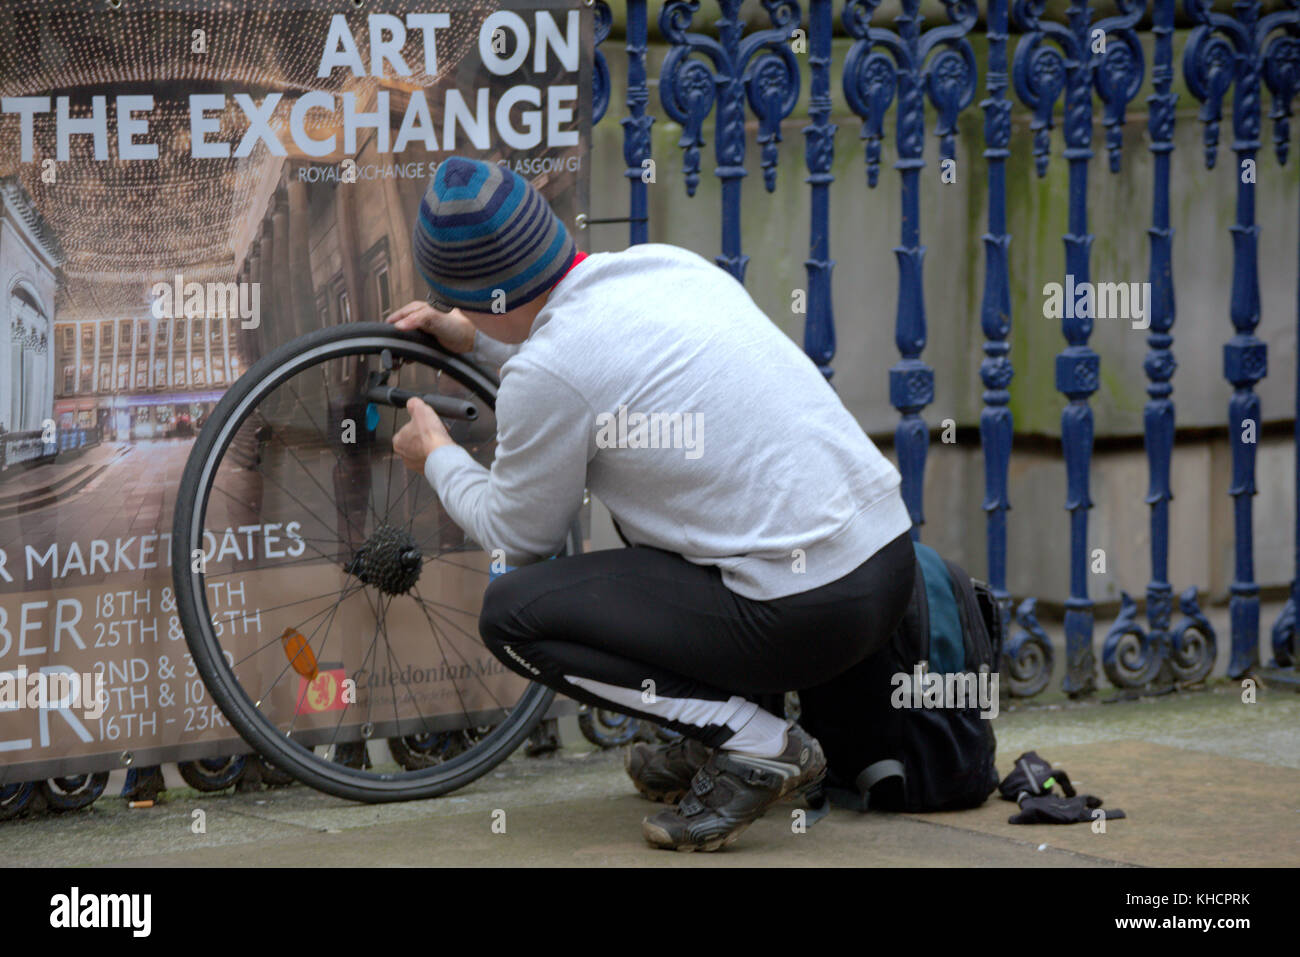 cyclist repairing a bike puncture in royal exchange square glasgow goma Stock Photo